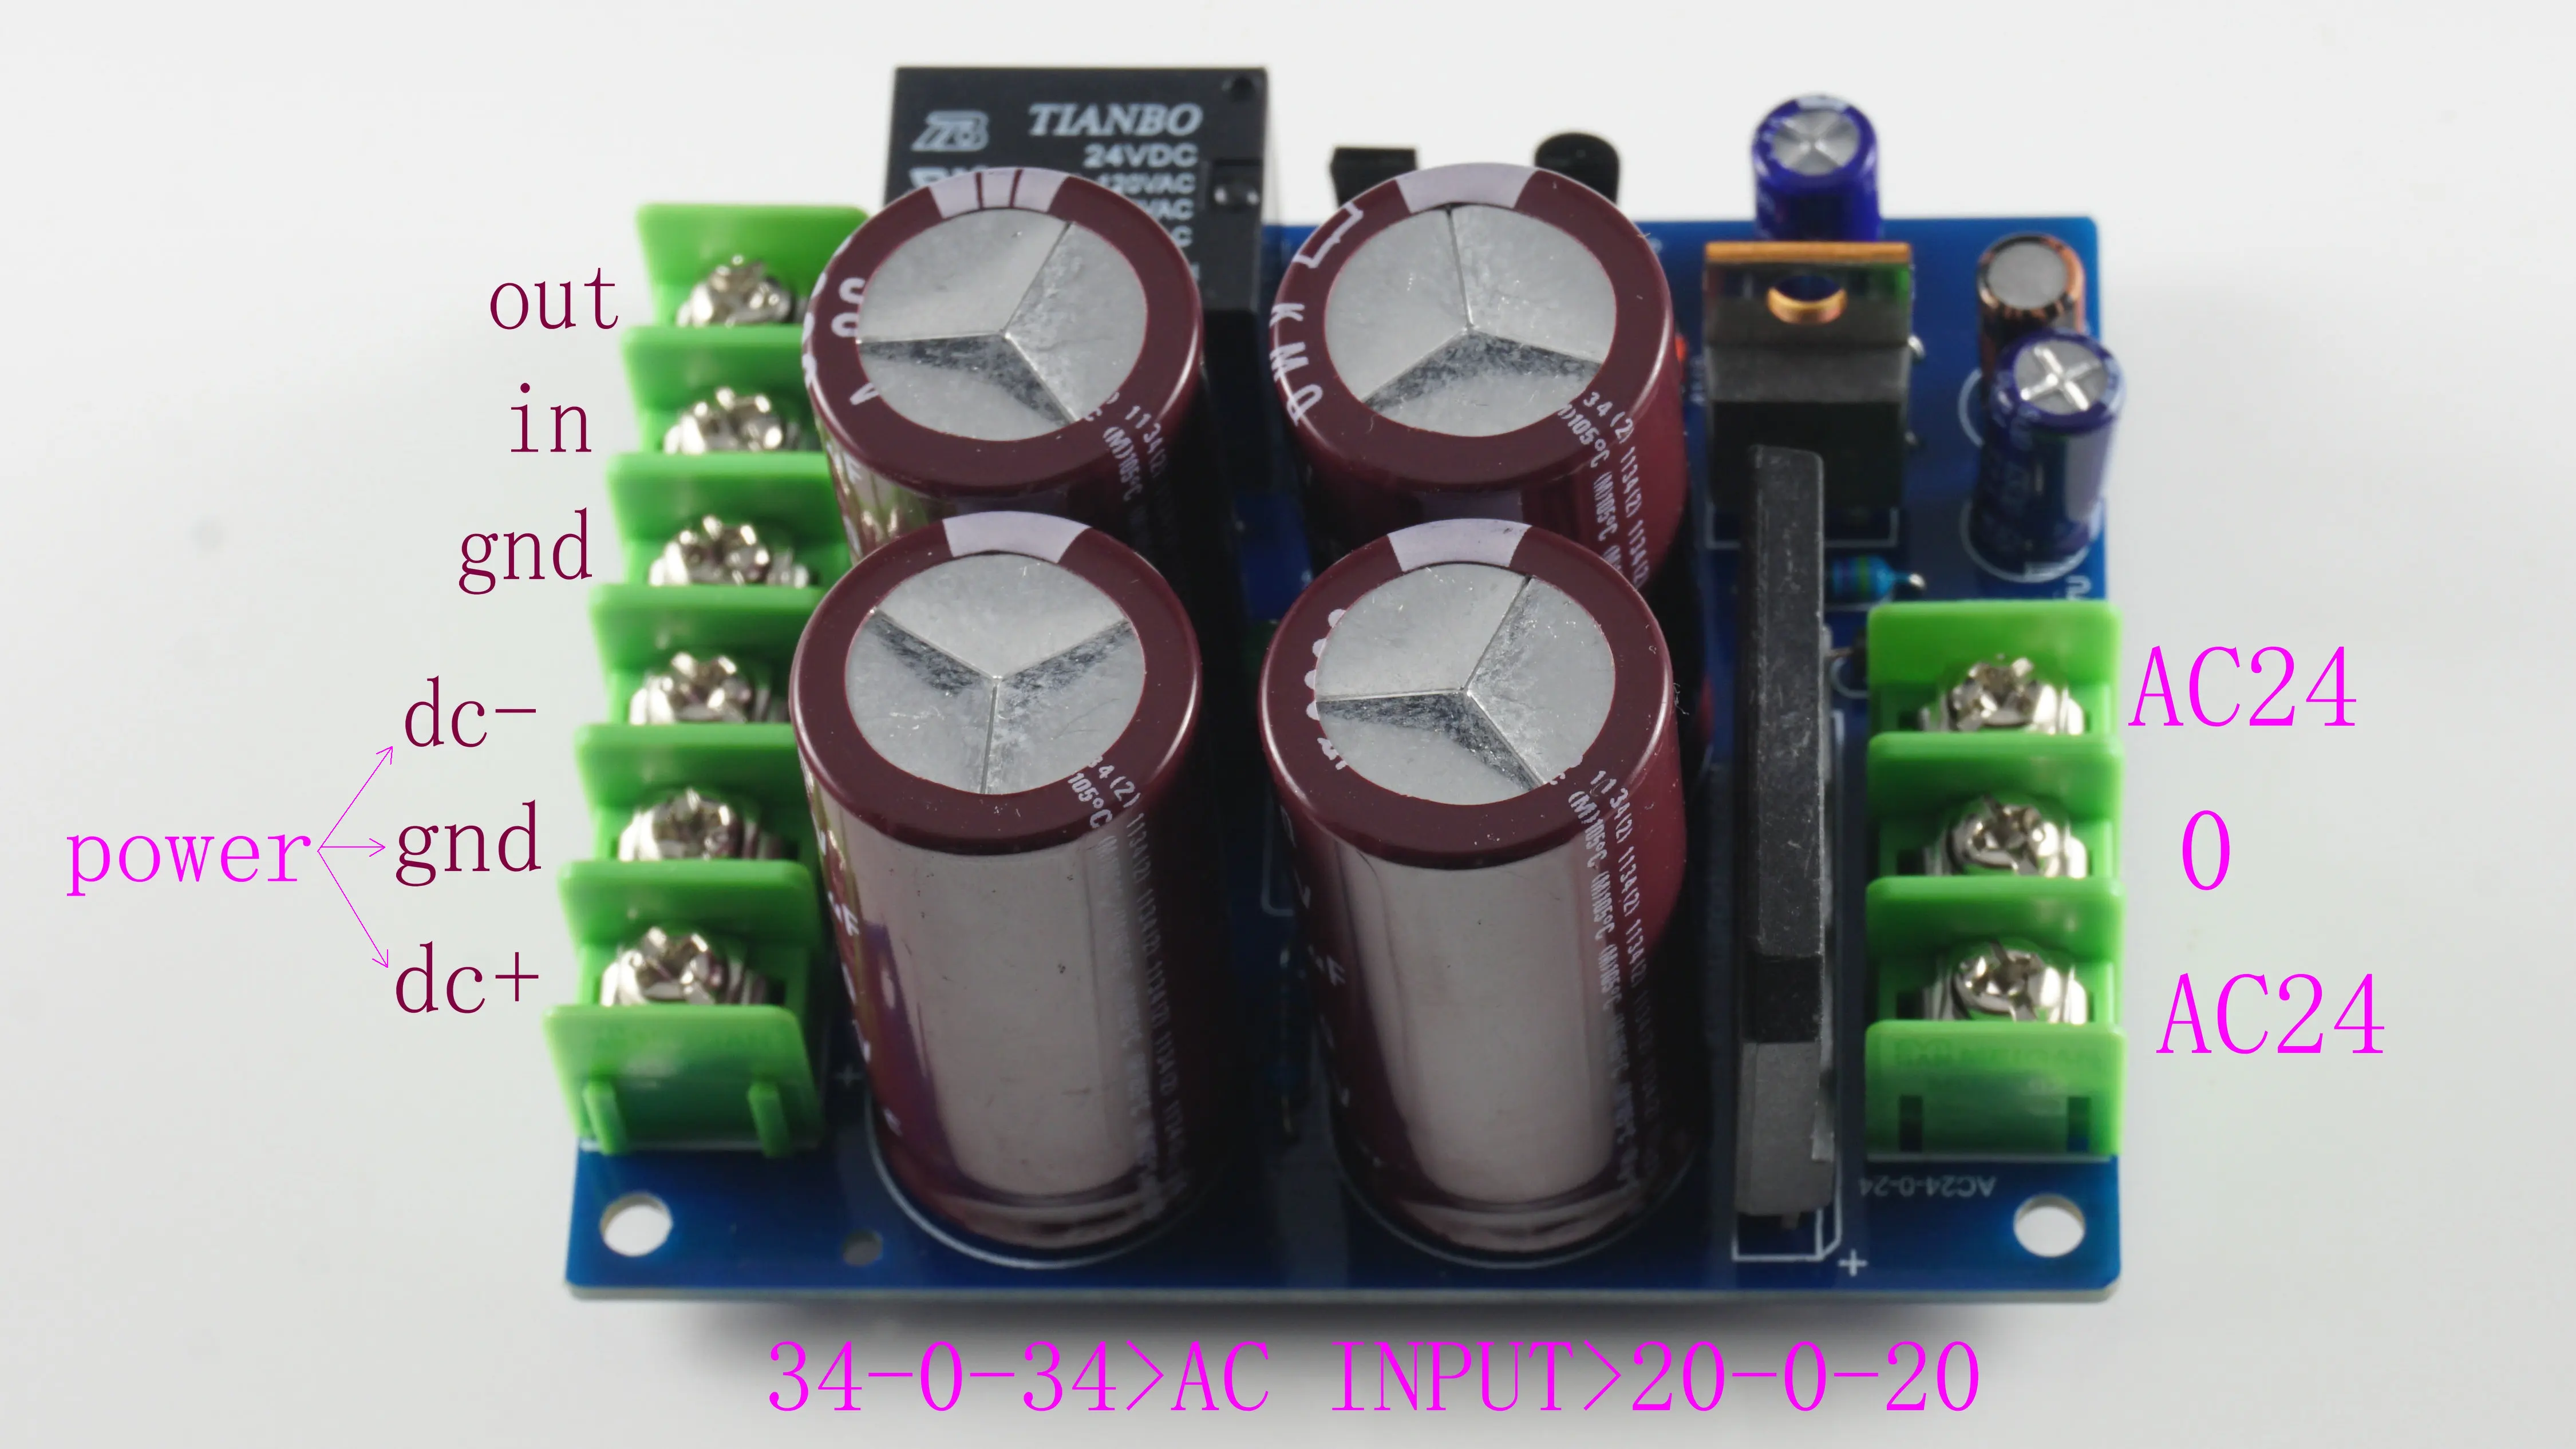 

L MX Series 50V 3300UF*4 Finished Board Rectifier Power Supply Mono Channel With Sound Box DC Protection Board